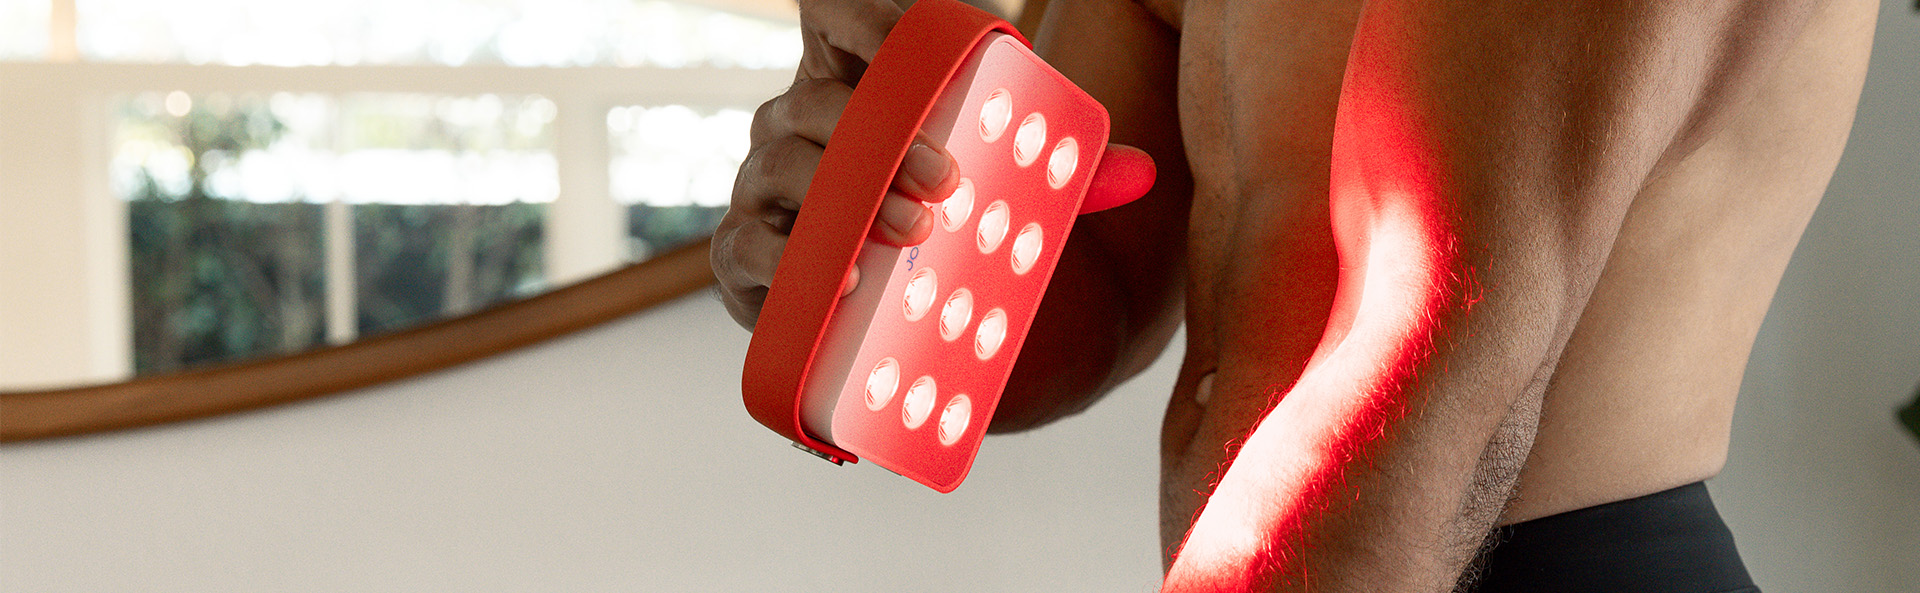 Does Red Light Therapy Work?